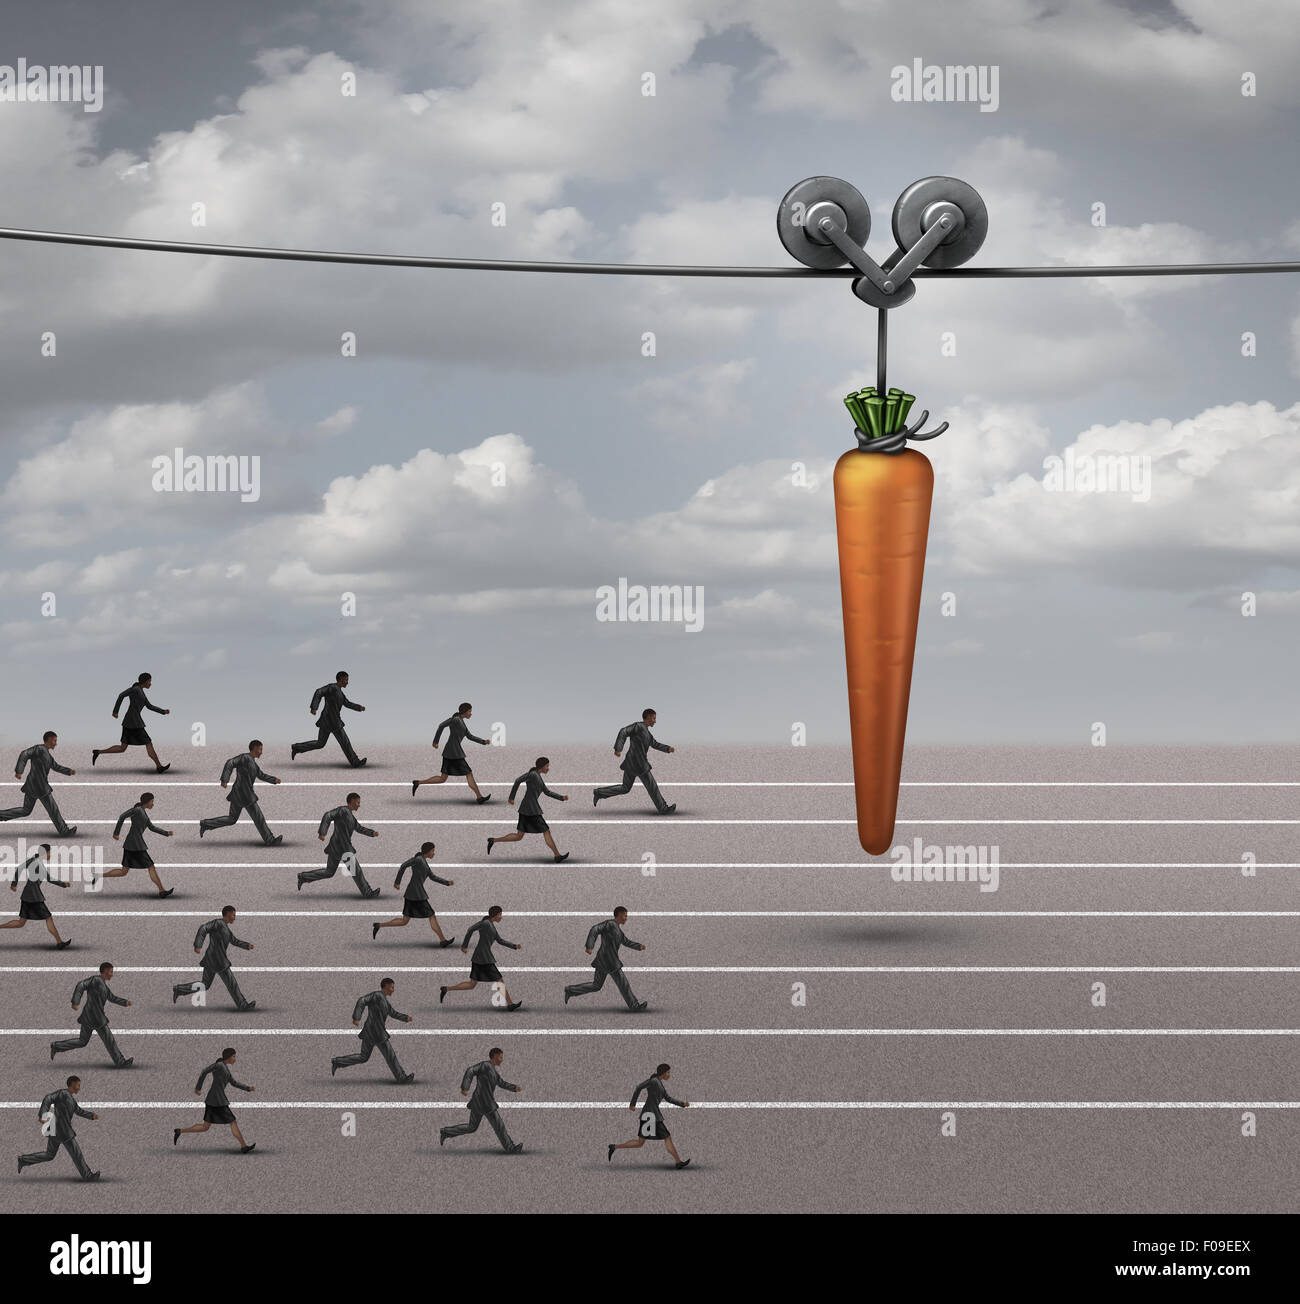 Employee incentive business concept as a group of businessmen and businesswomen running on a track towards a dangling carrot on Stock Photo